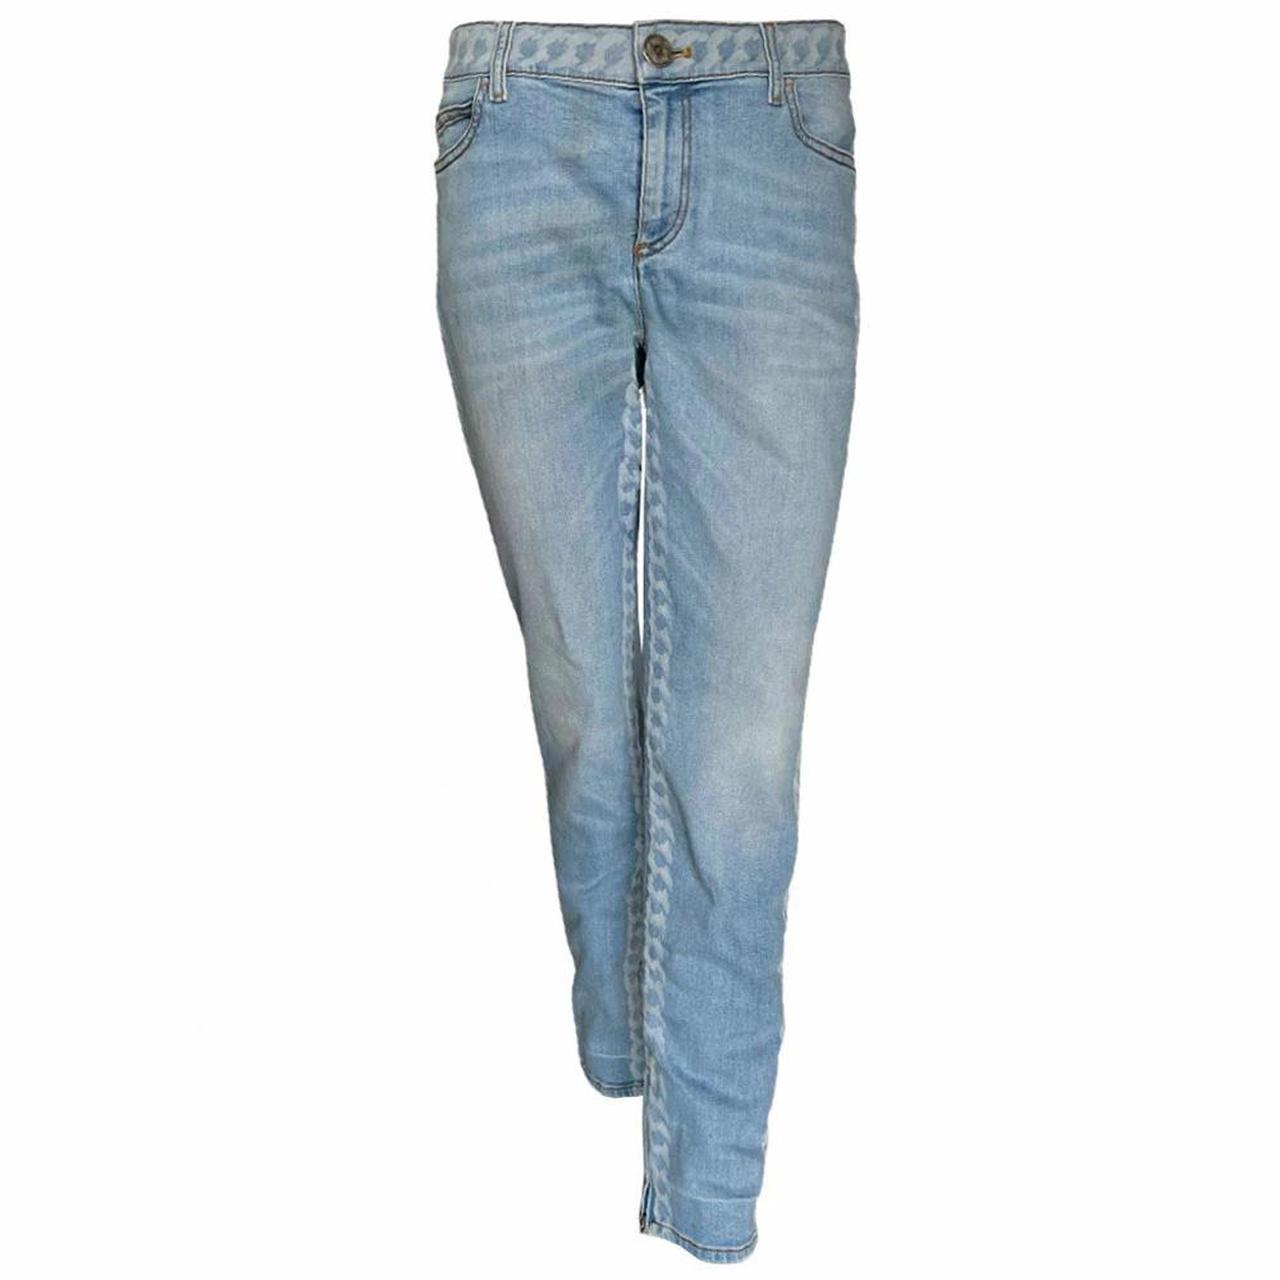 Chanel Low-Rise Skinny Jeans